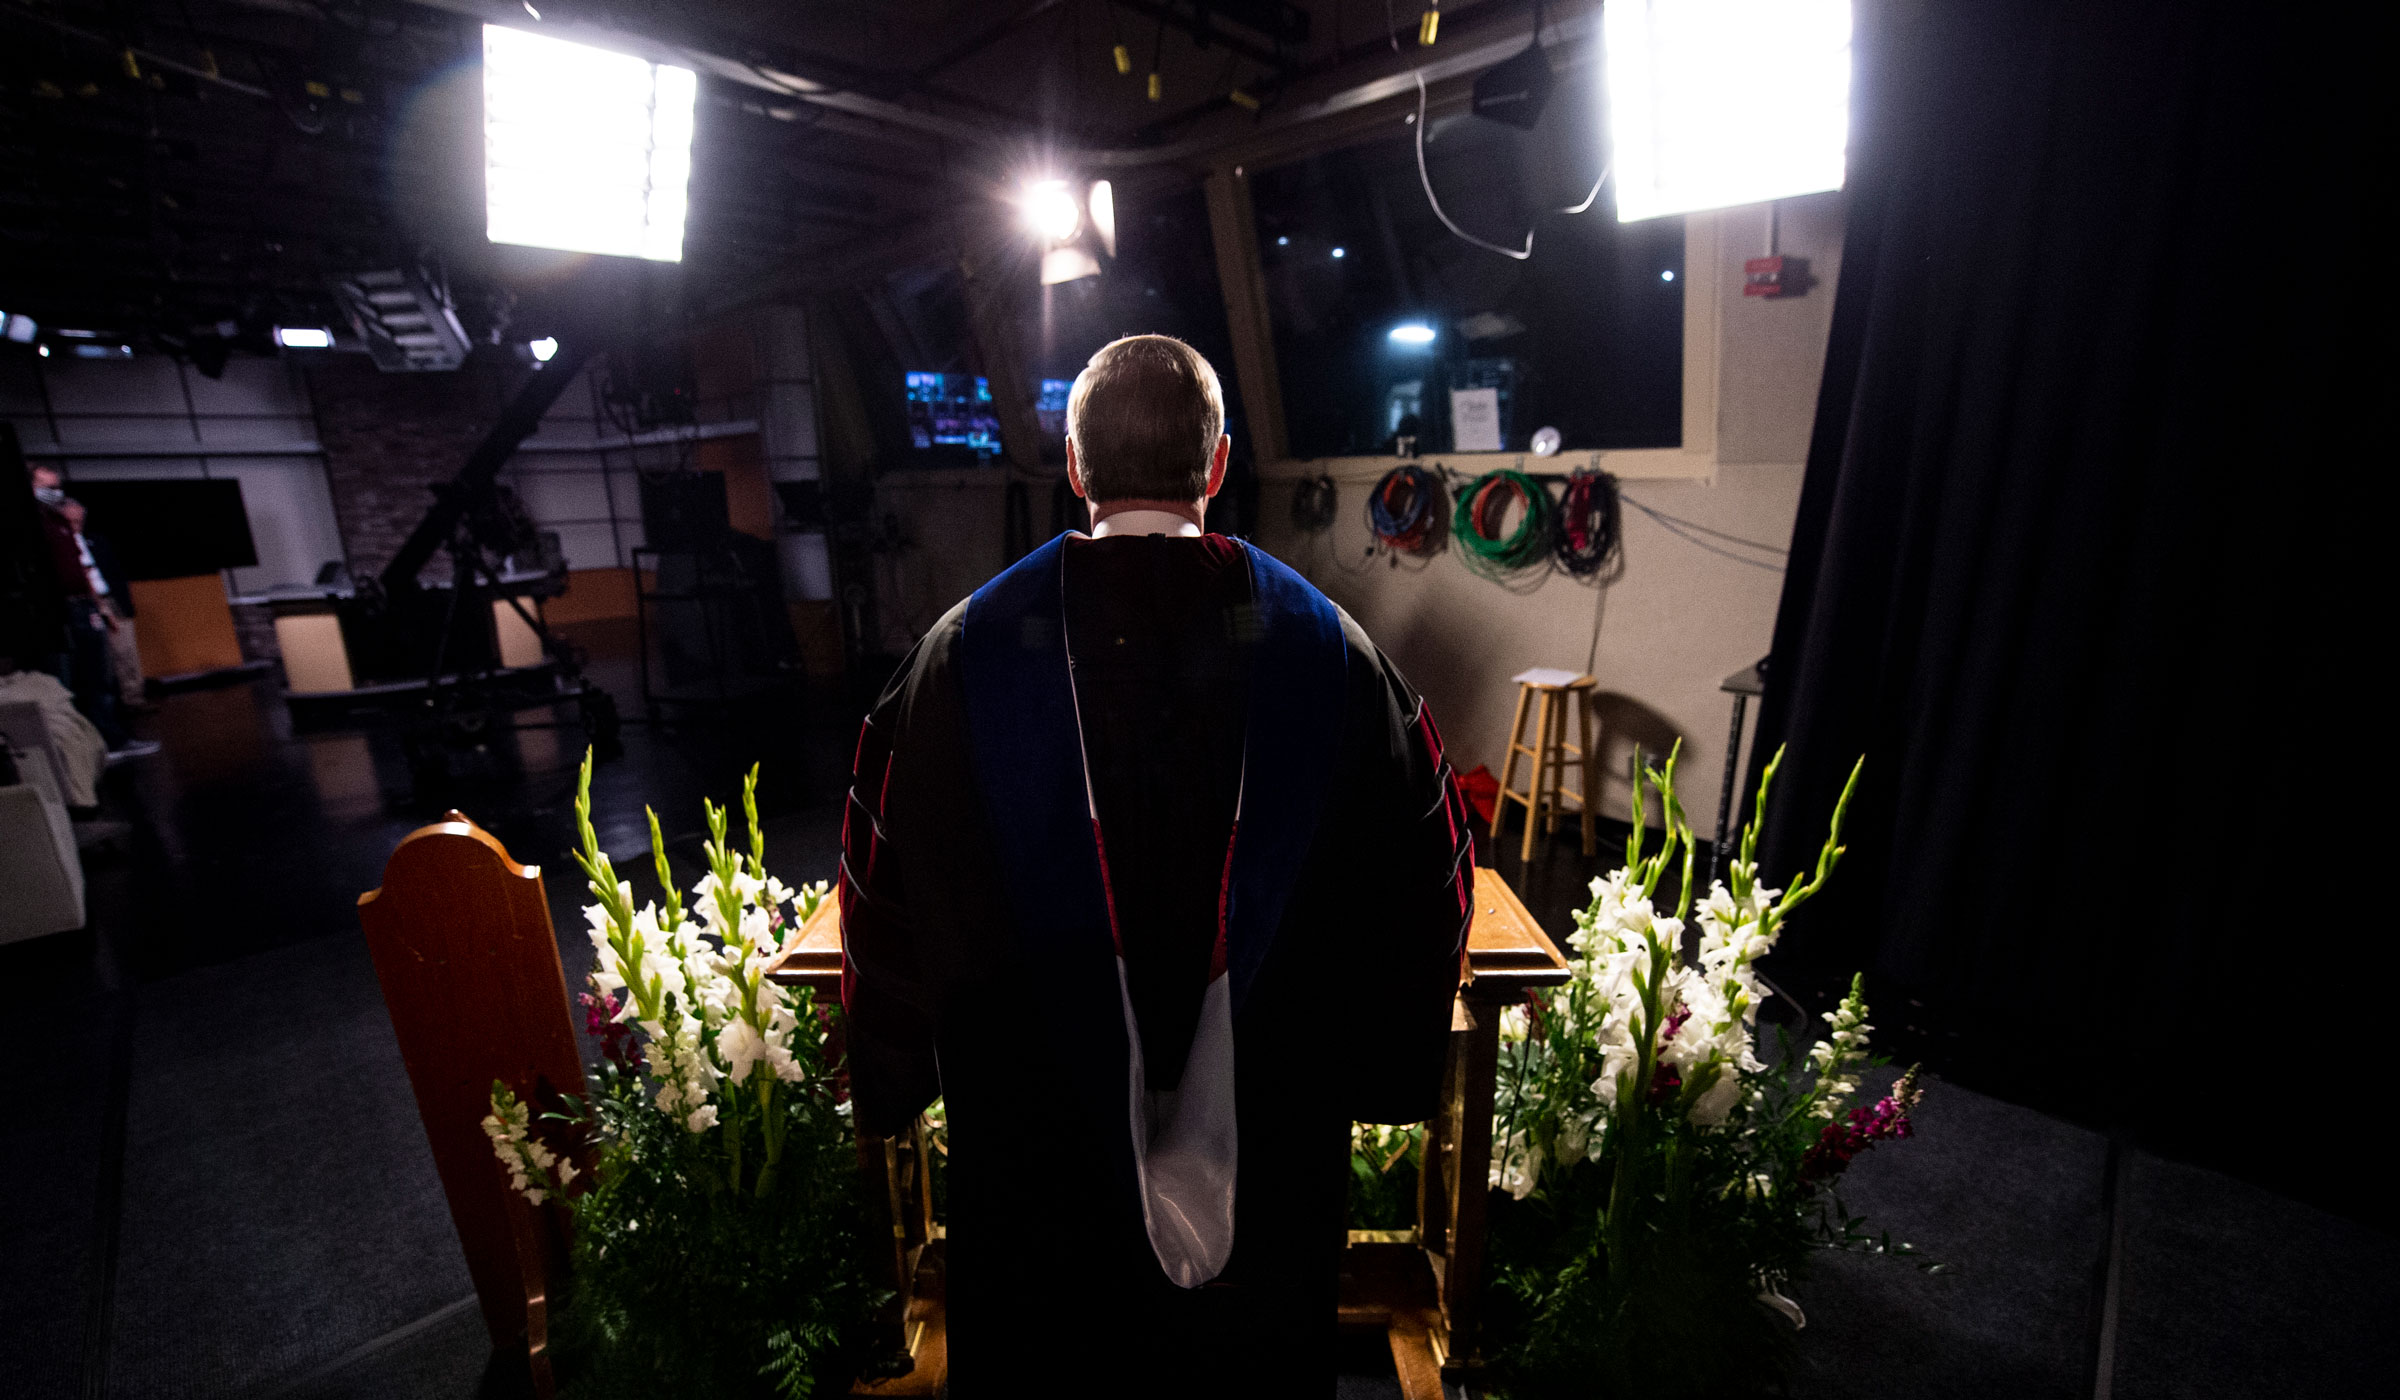 MSU President Dr. Mark Keenum prepares to address graduates and their families through a virtual commencement ceremony due to the COVID-19 pandemic.